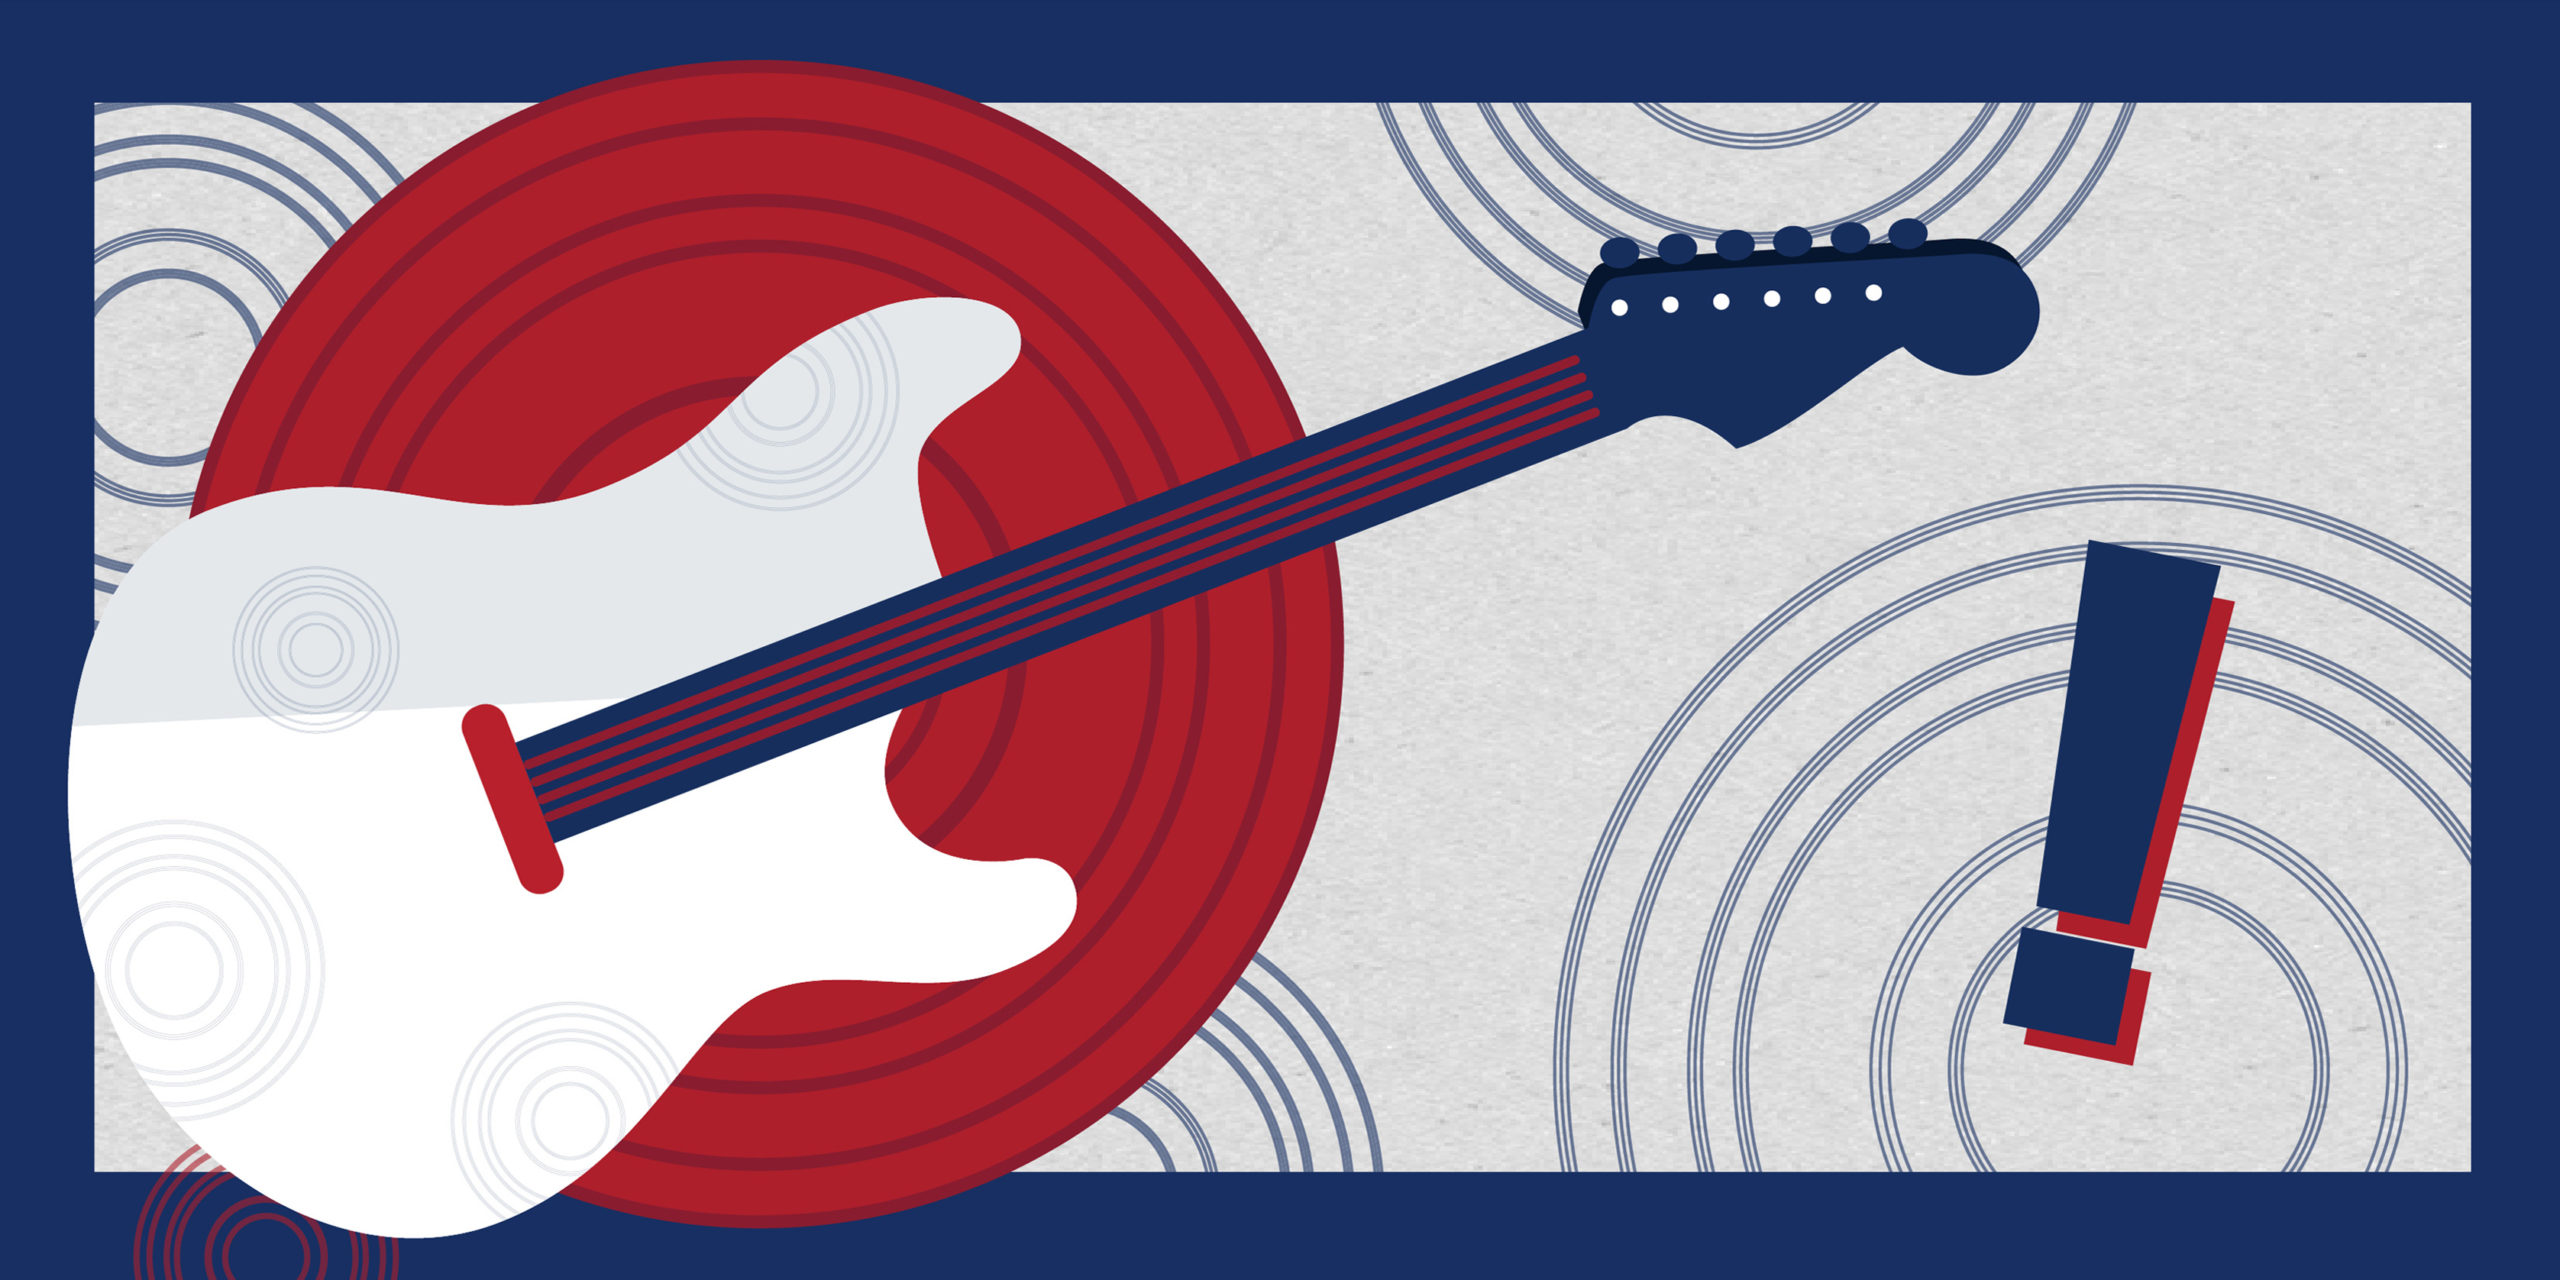 Guitar with an abstract background